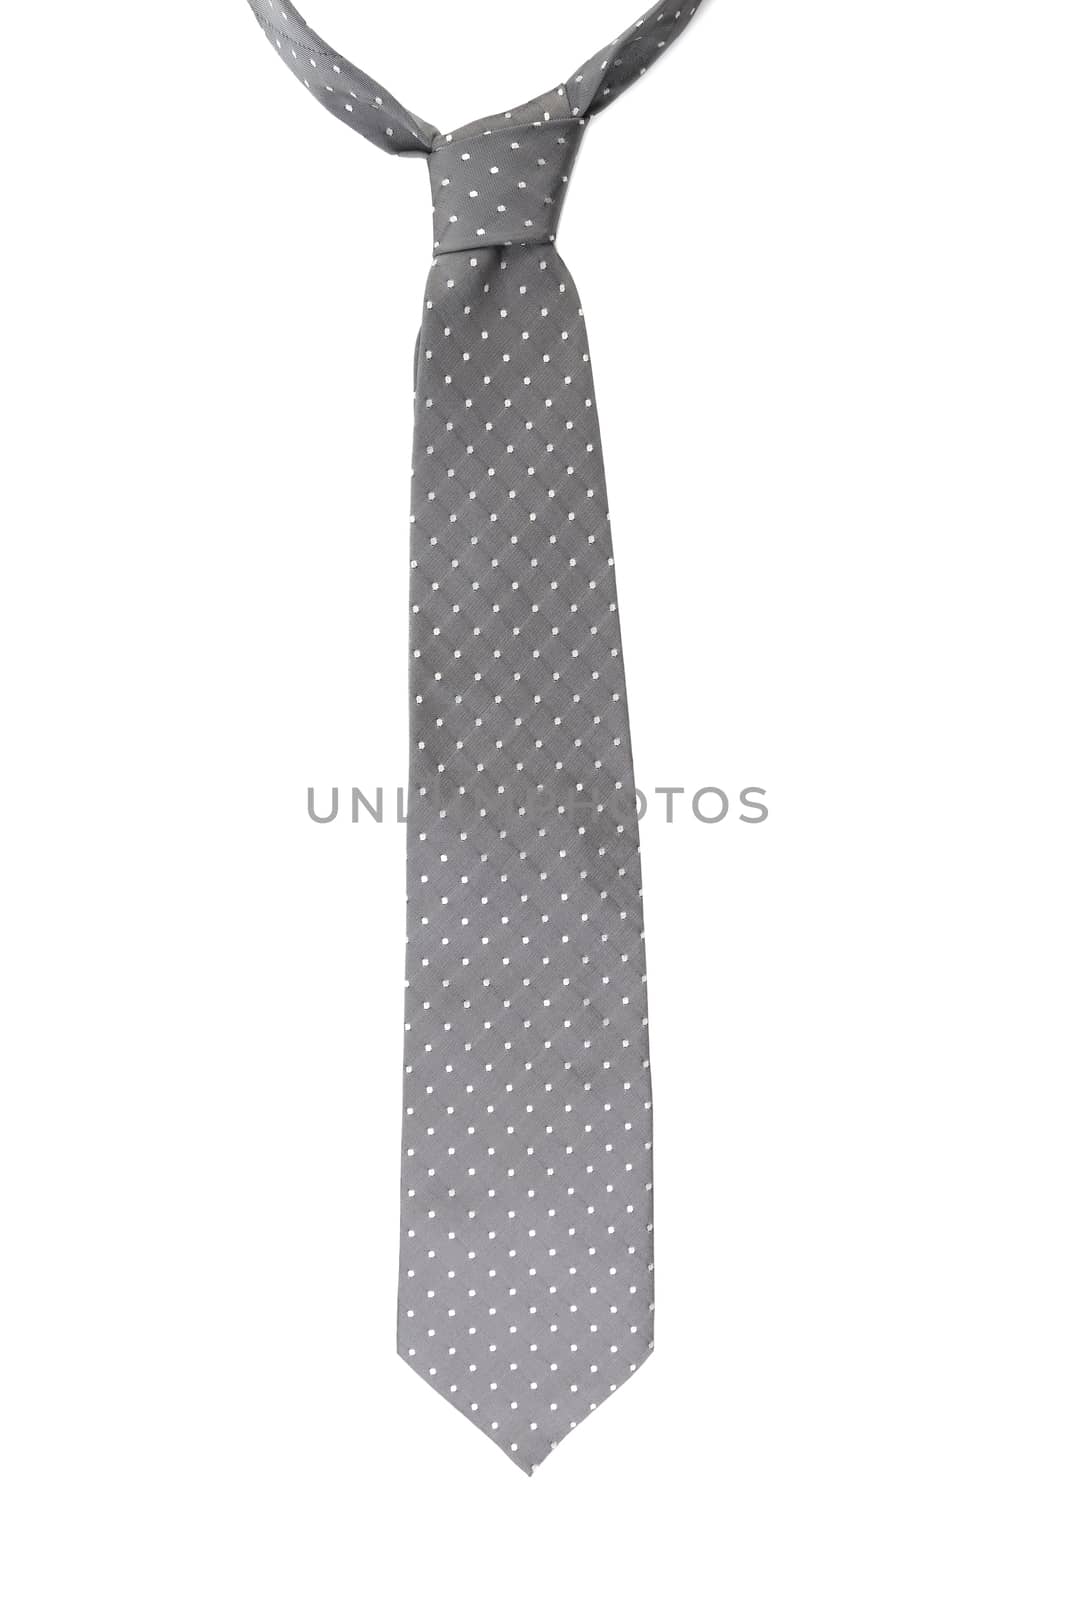 Gray tie with white speck. Isolated on a white background.